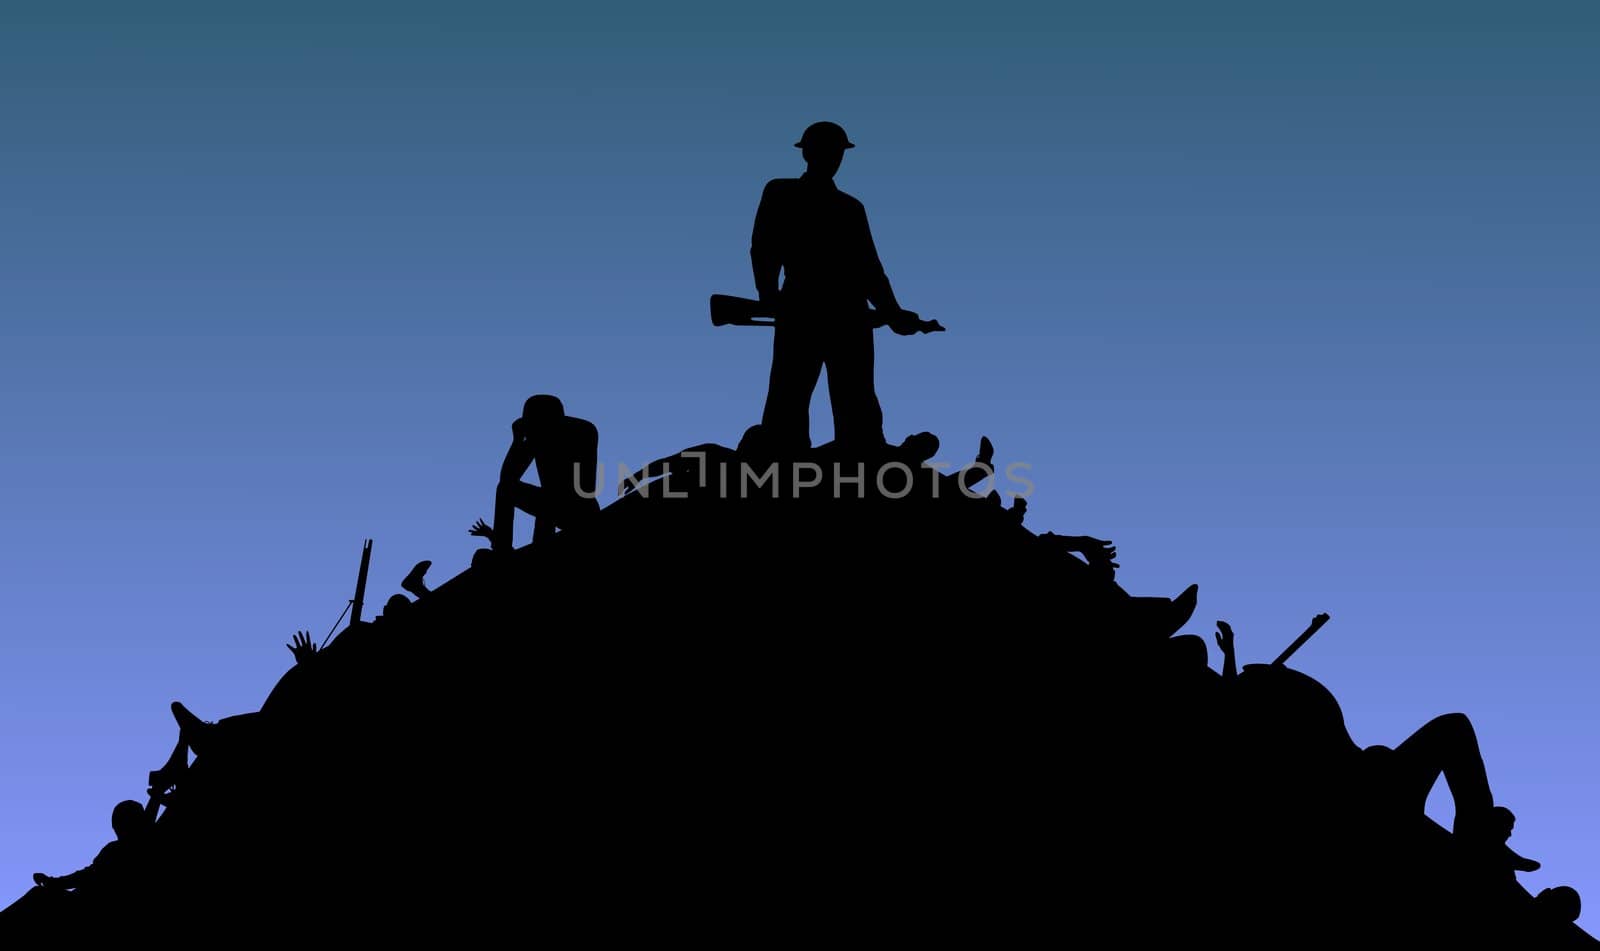 Illustration of a soldier standing on top of a pile of bodies